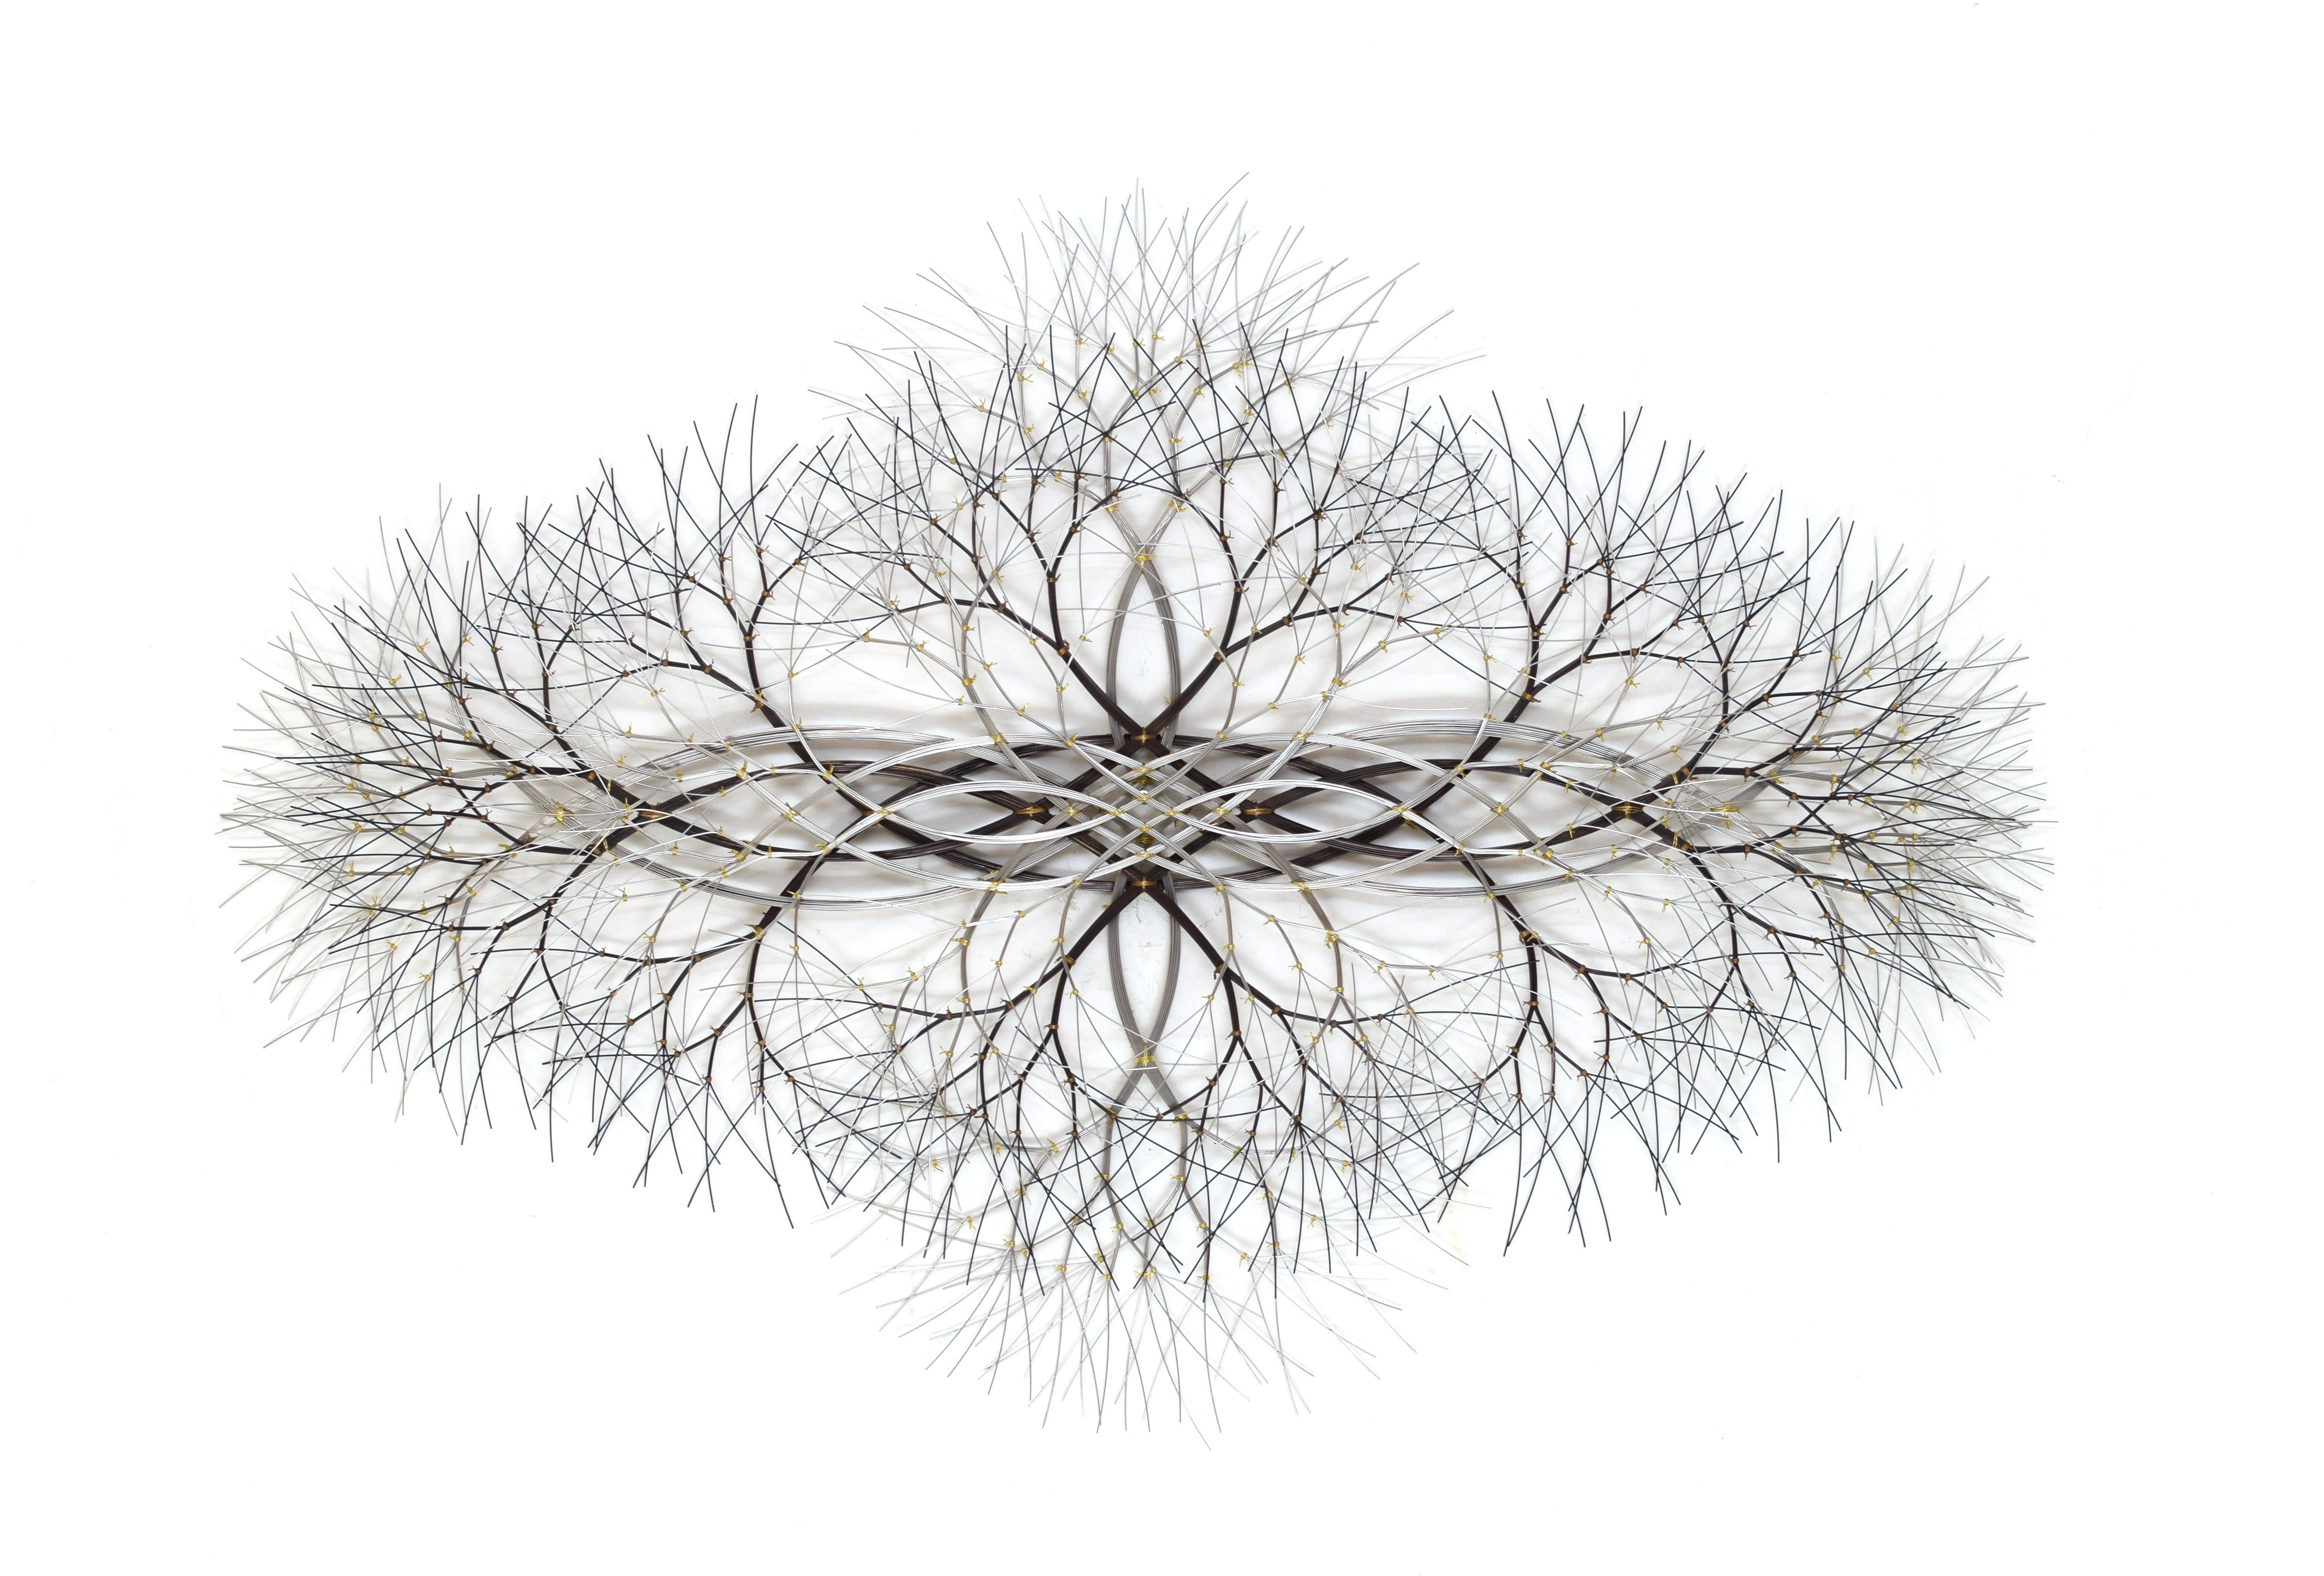 57"x39" Metal Wall Sculpture in Bronze and Stainless, #646. Available Now